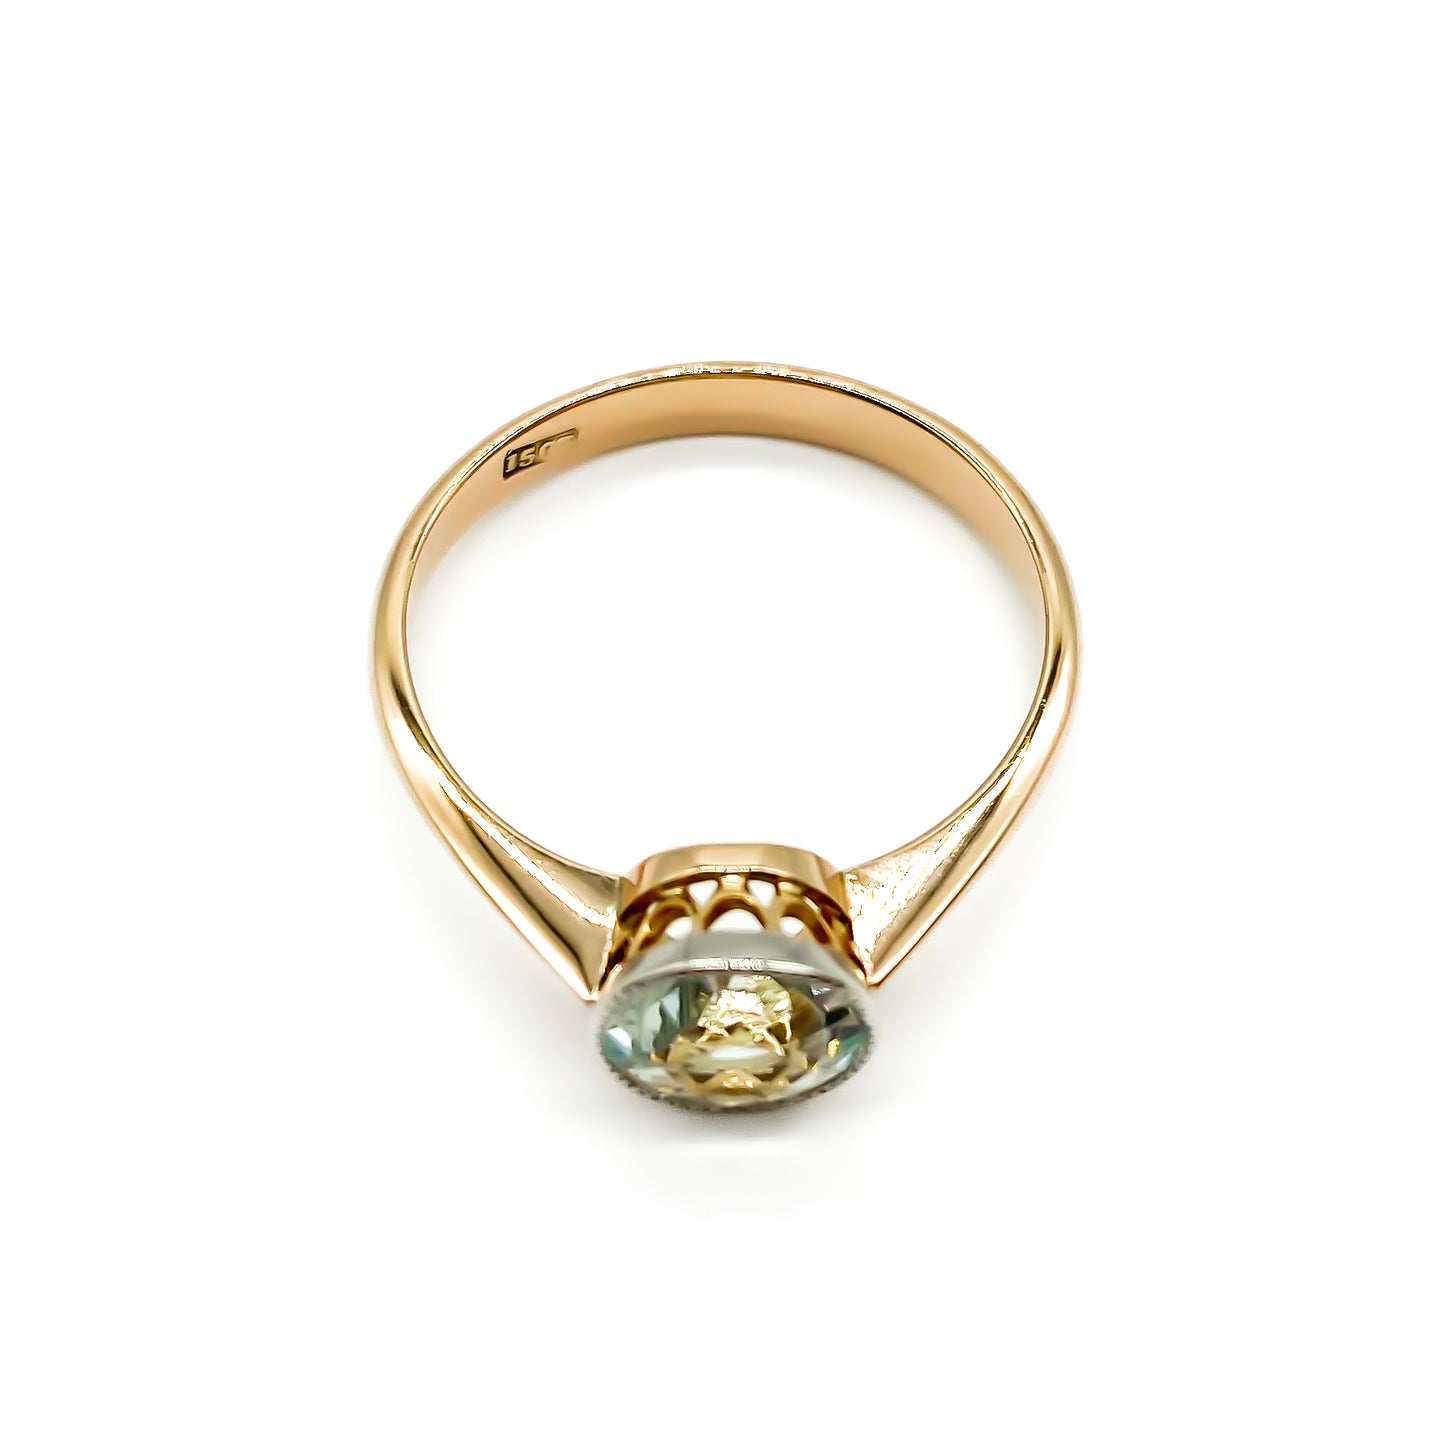 Stunning Edwardian rose gold ring with a round faceted sea blue aquamarine in a white and rose gold setting.